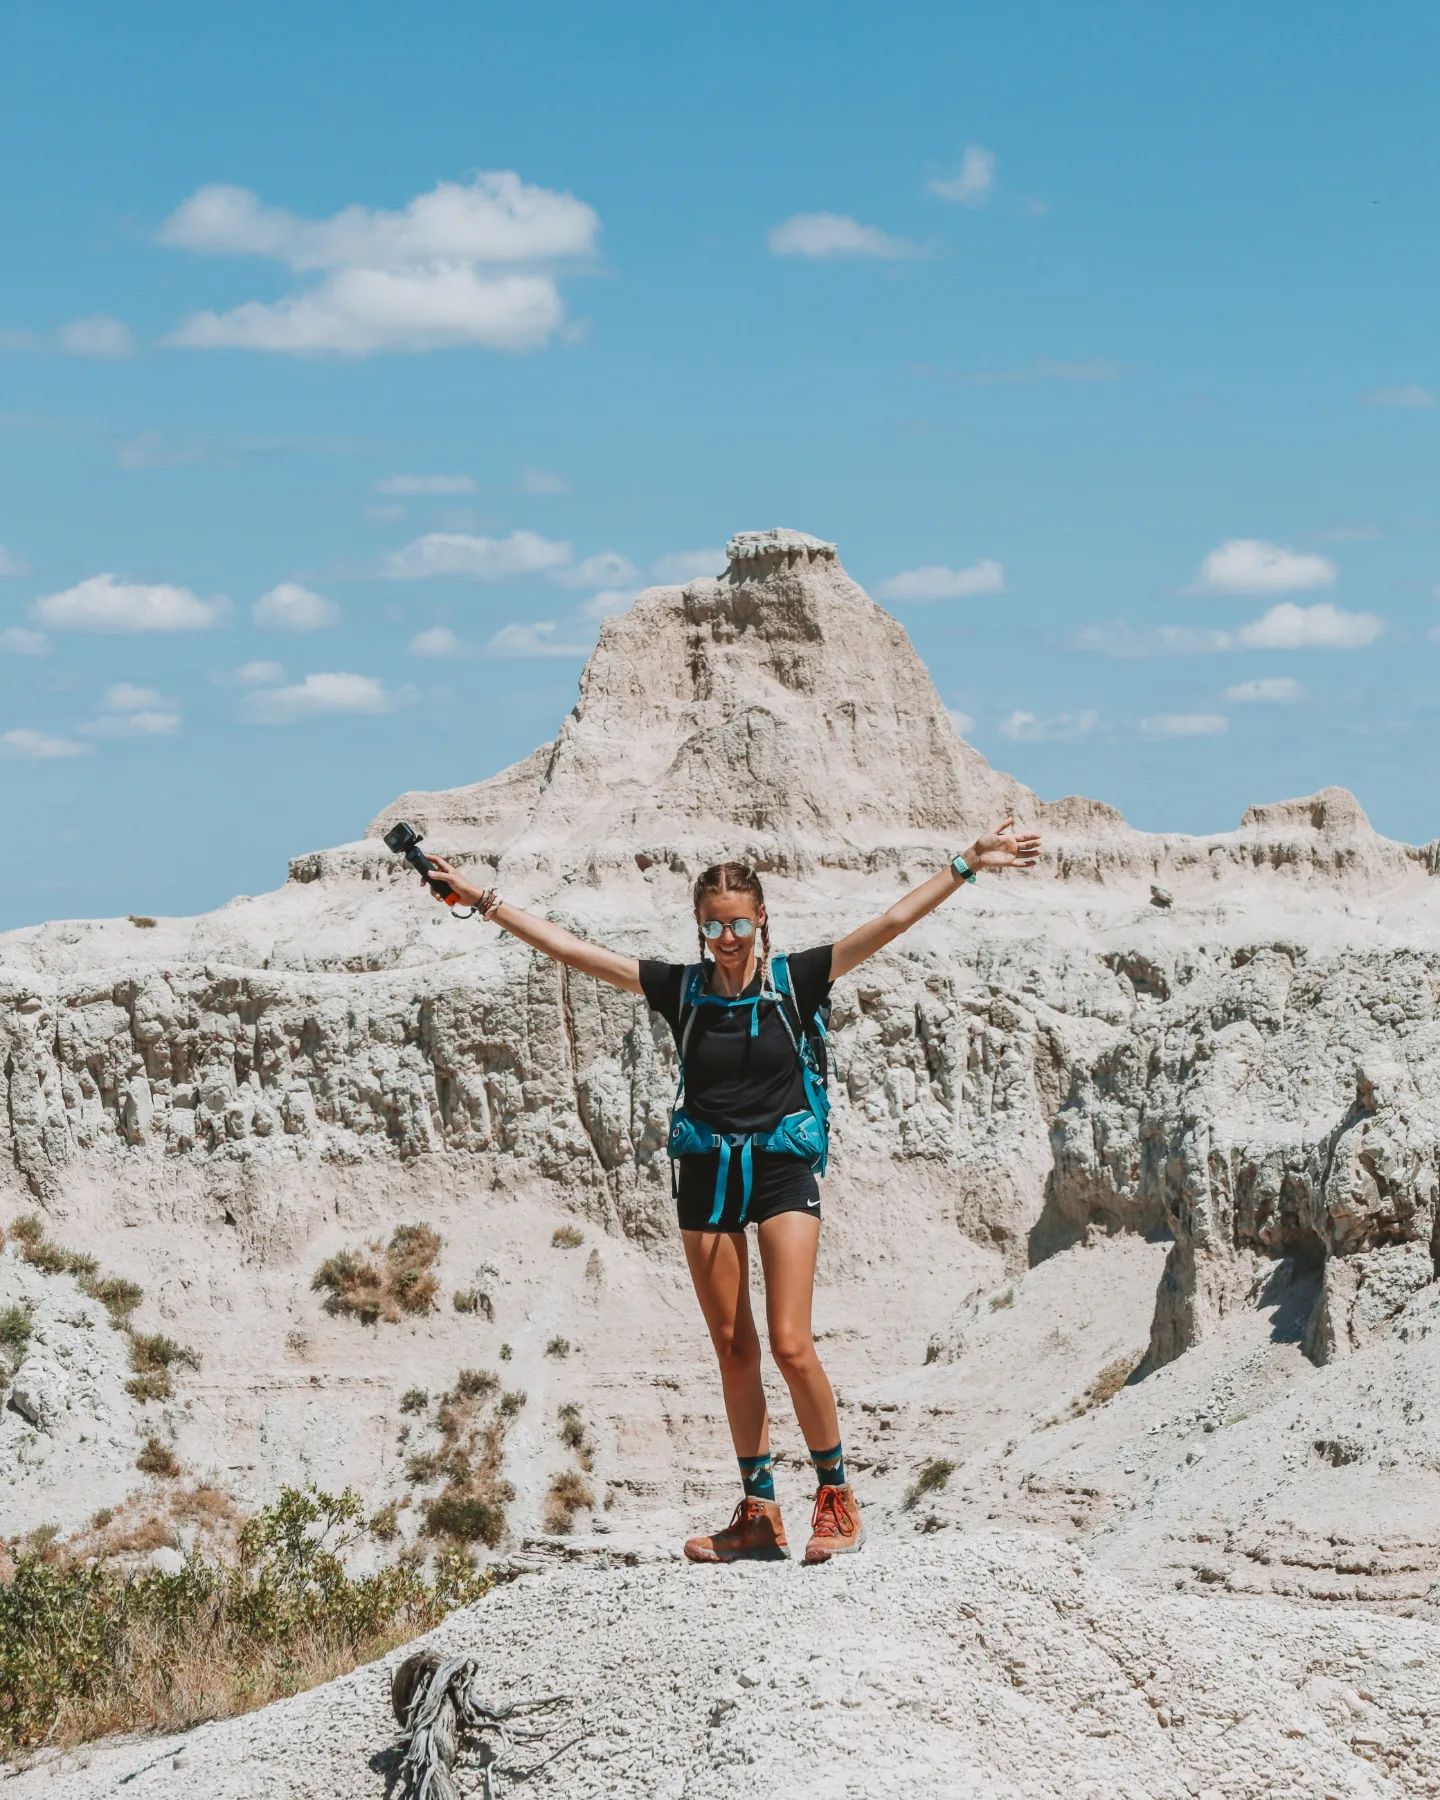 In Badlands, there are all kinds of rocks and things to trip over - sturdy, reliable footwear is a must!